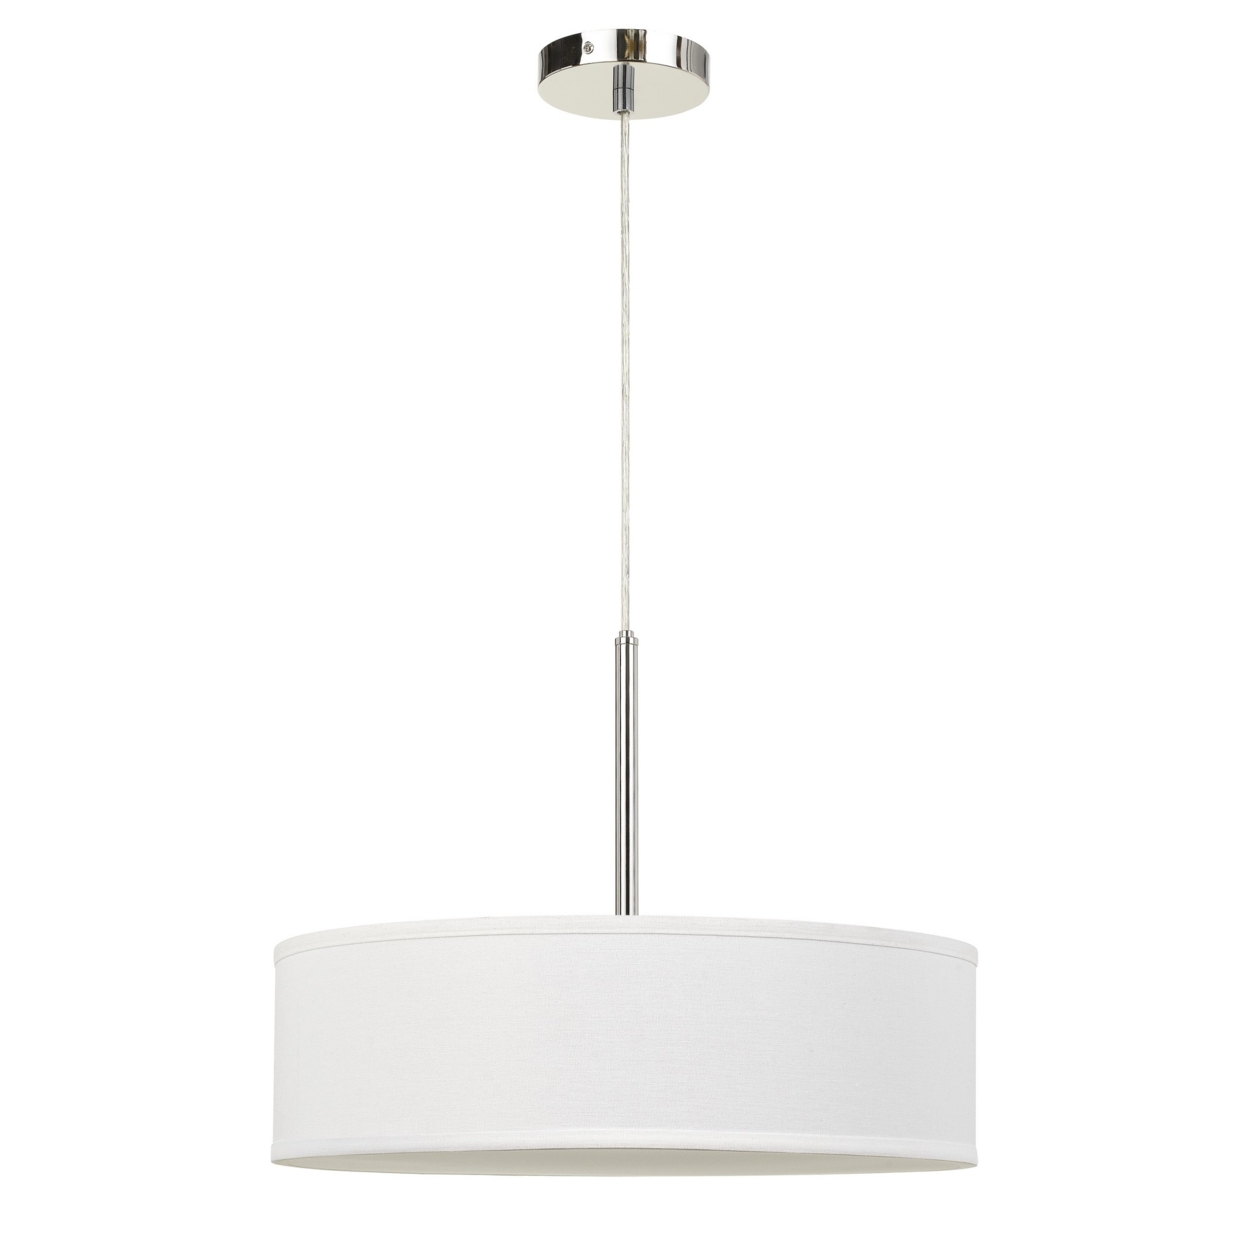 Integrated LED Dimmable Pendant Lighting With Fabric Drum Shade, White- Saltoro Sherpi